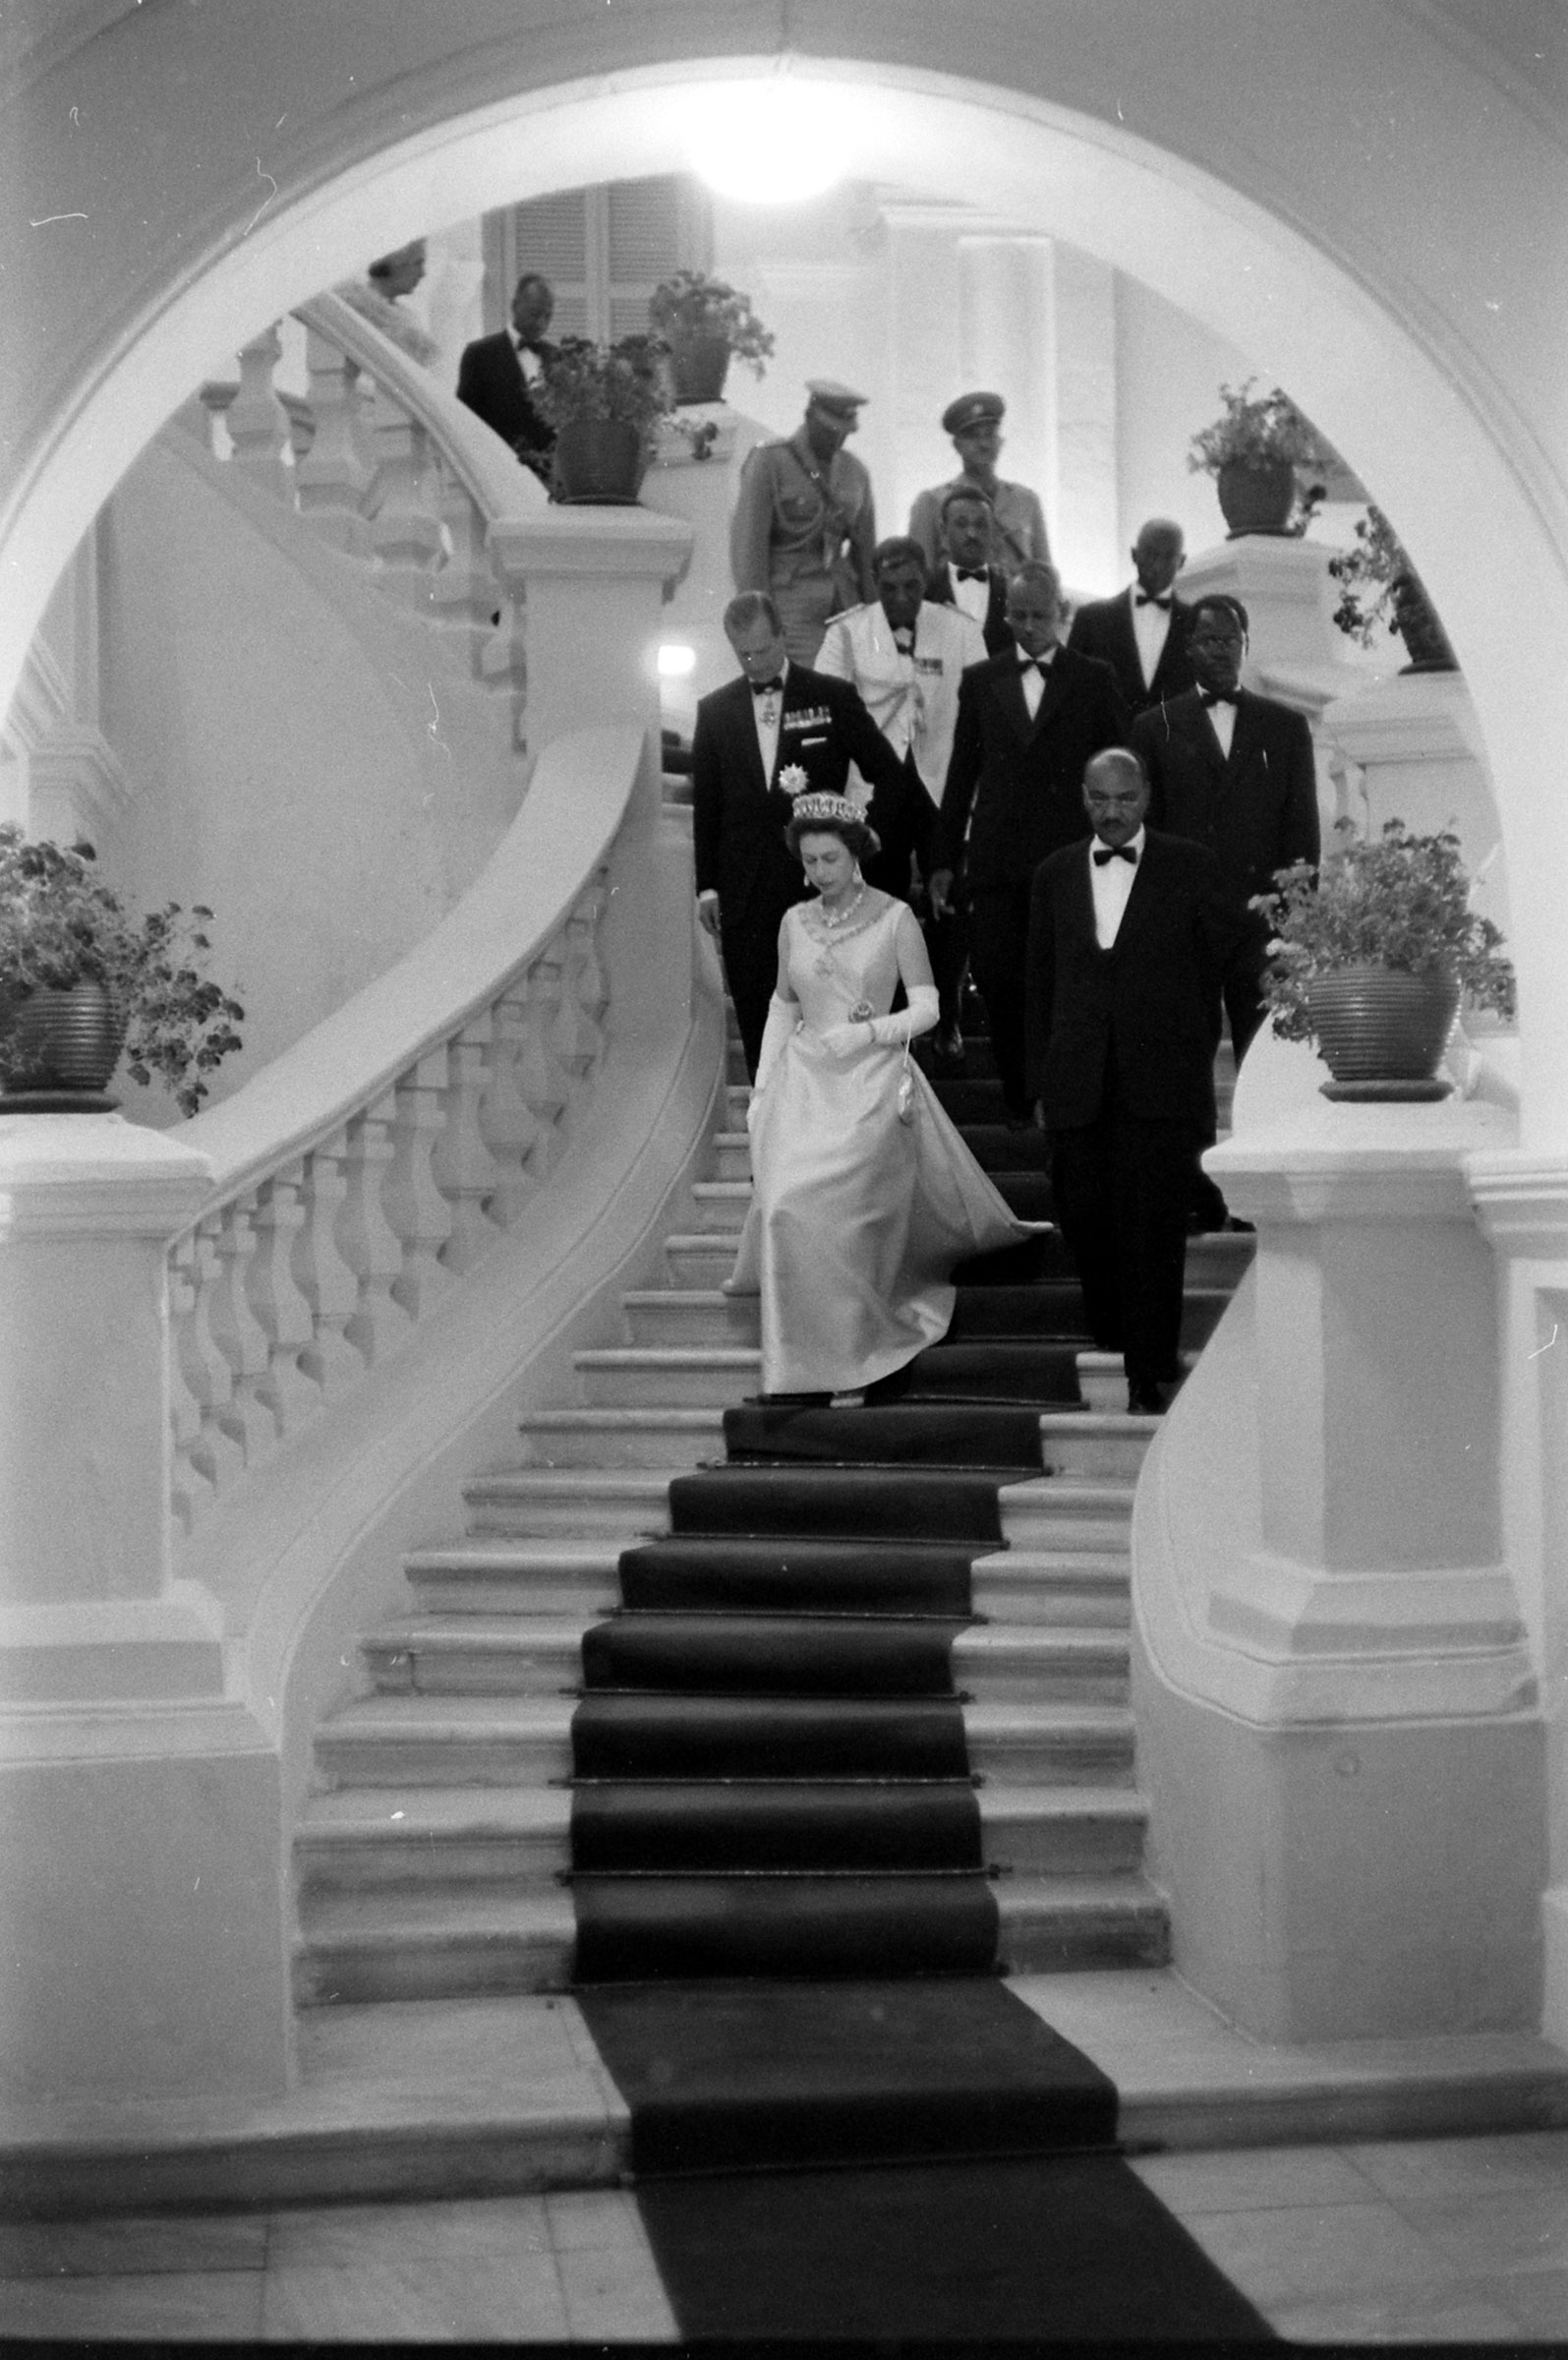 Queen Elizabeth II descending a staircase at a formal gathering during her visit to Ethiopia. (John Loengard—The LIFE Picture Collection/Getty Images)